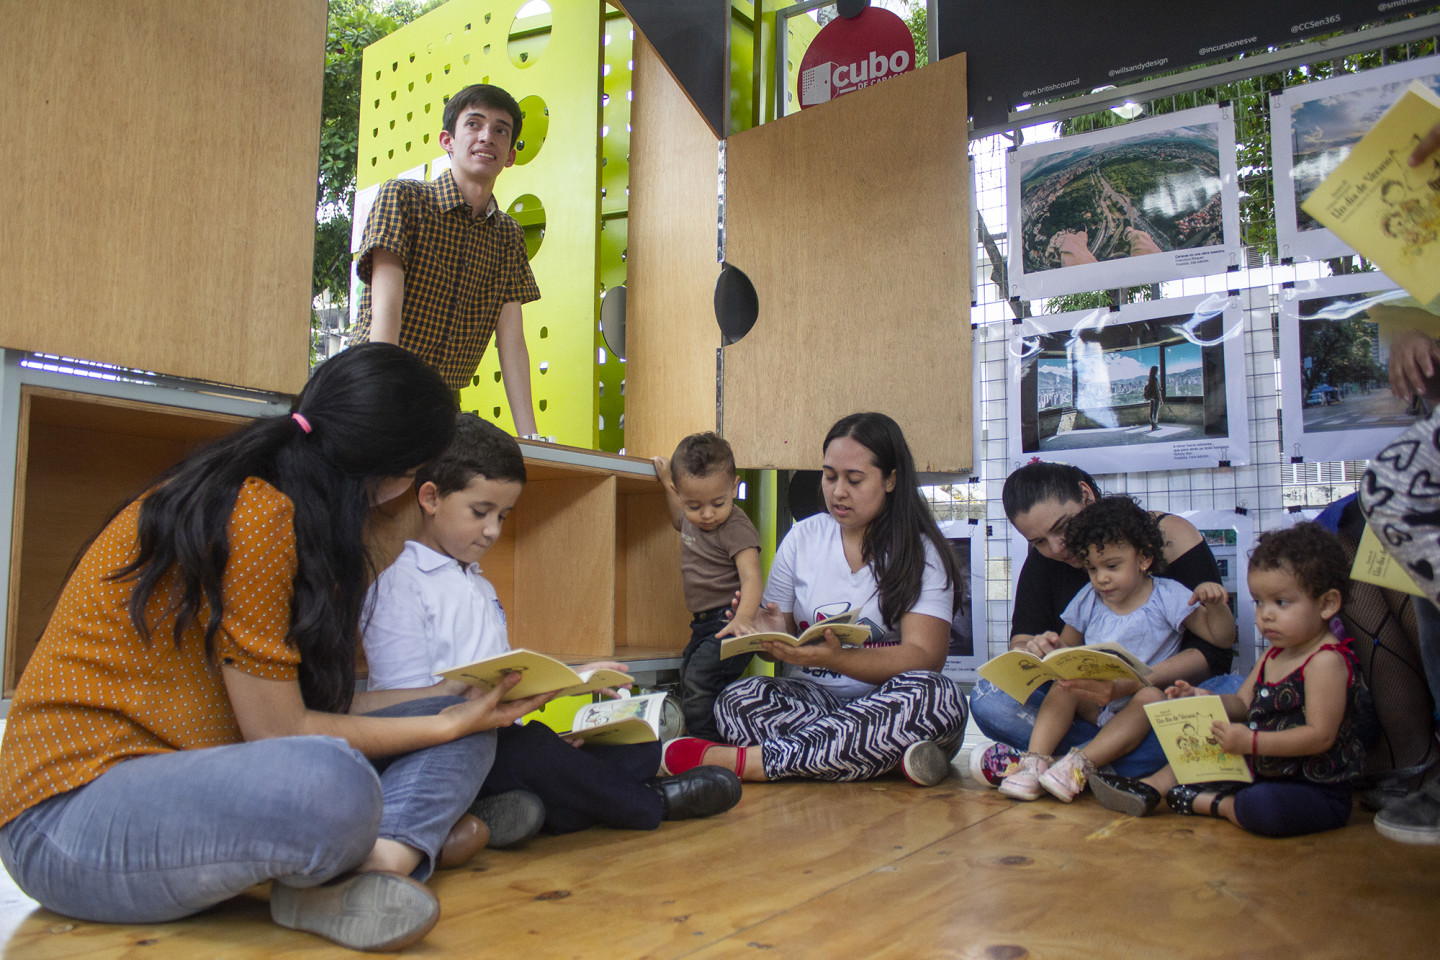 Catalyst Cube used as an education space in Caracas © Rui Cordovez